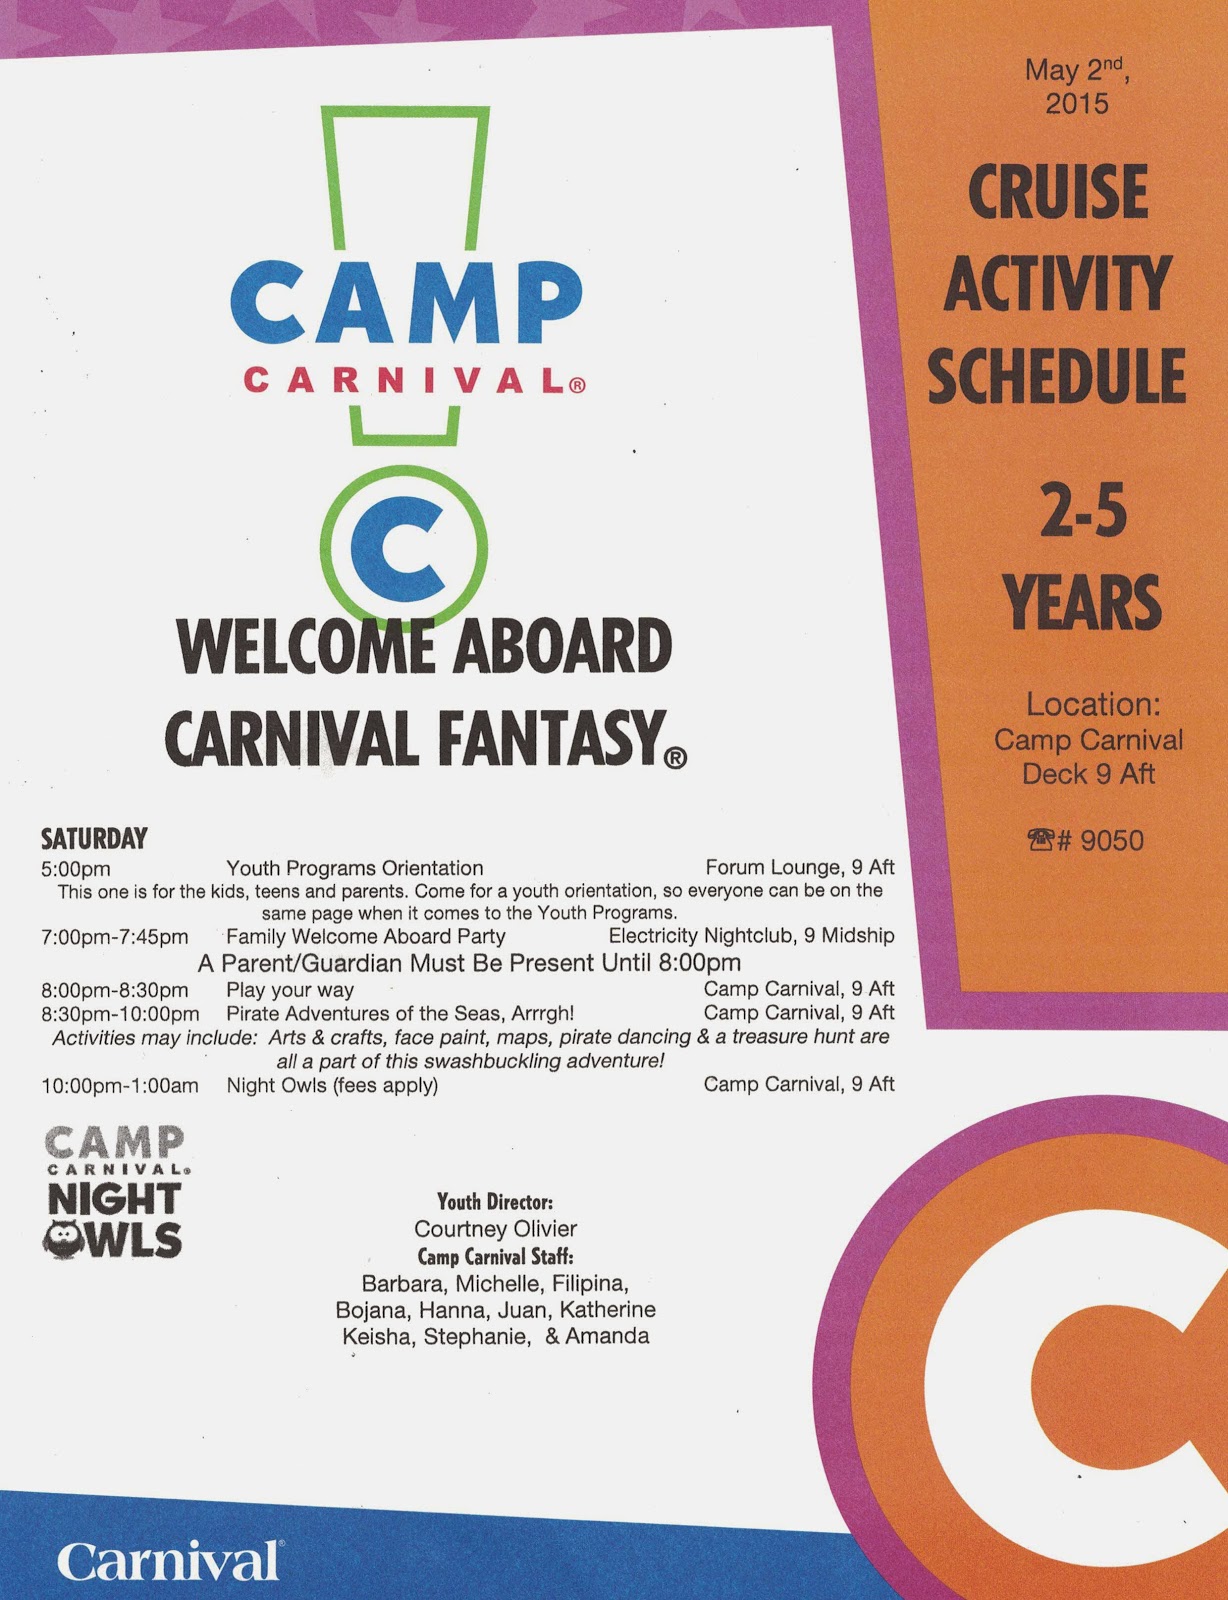 carnival cruise schedule today